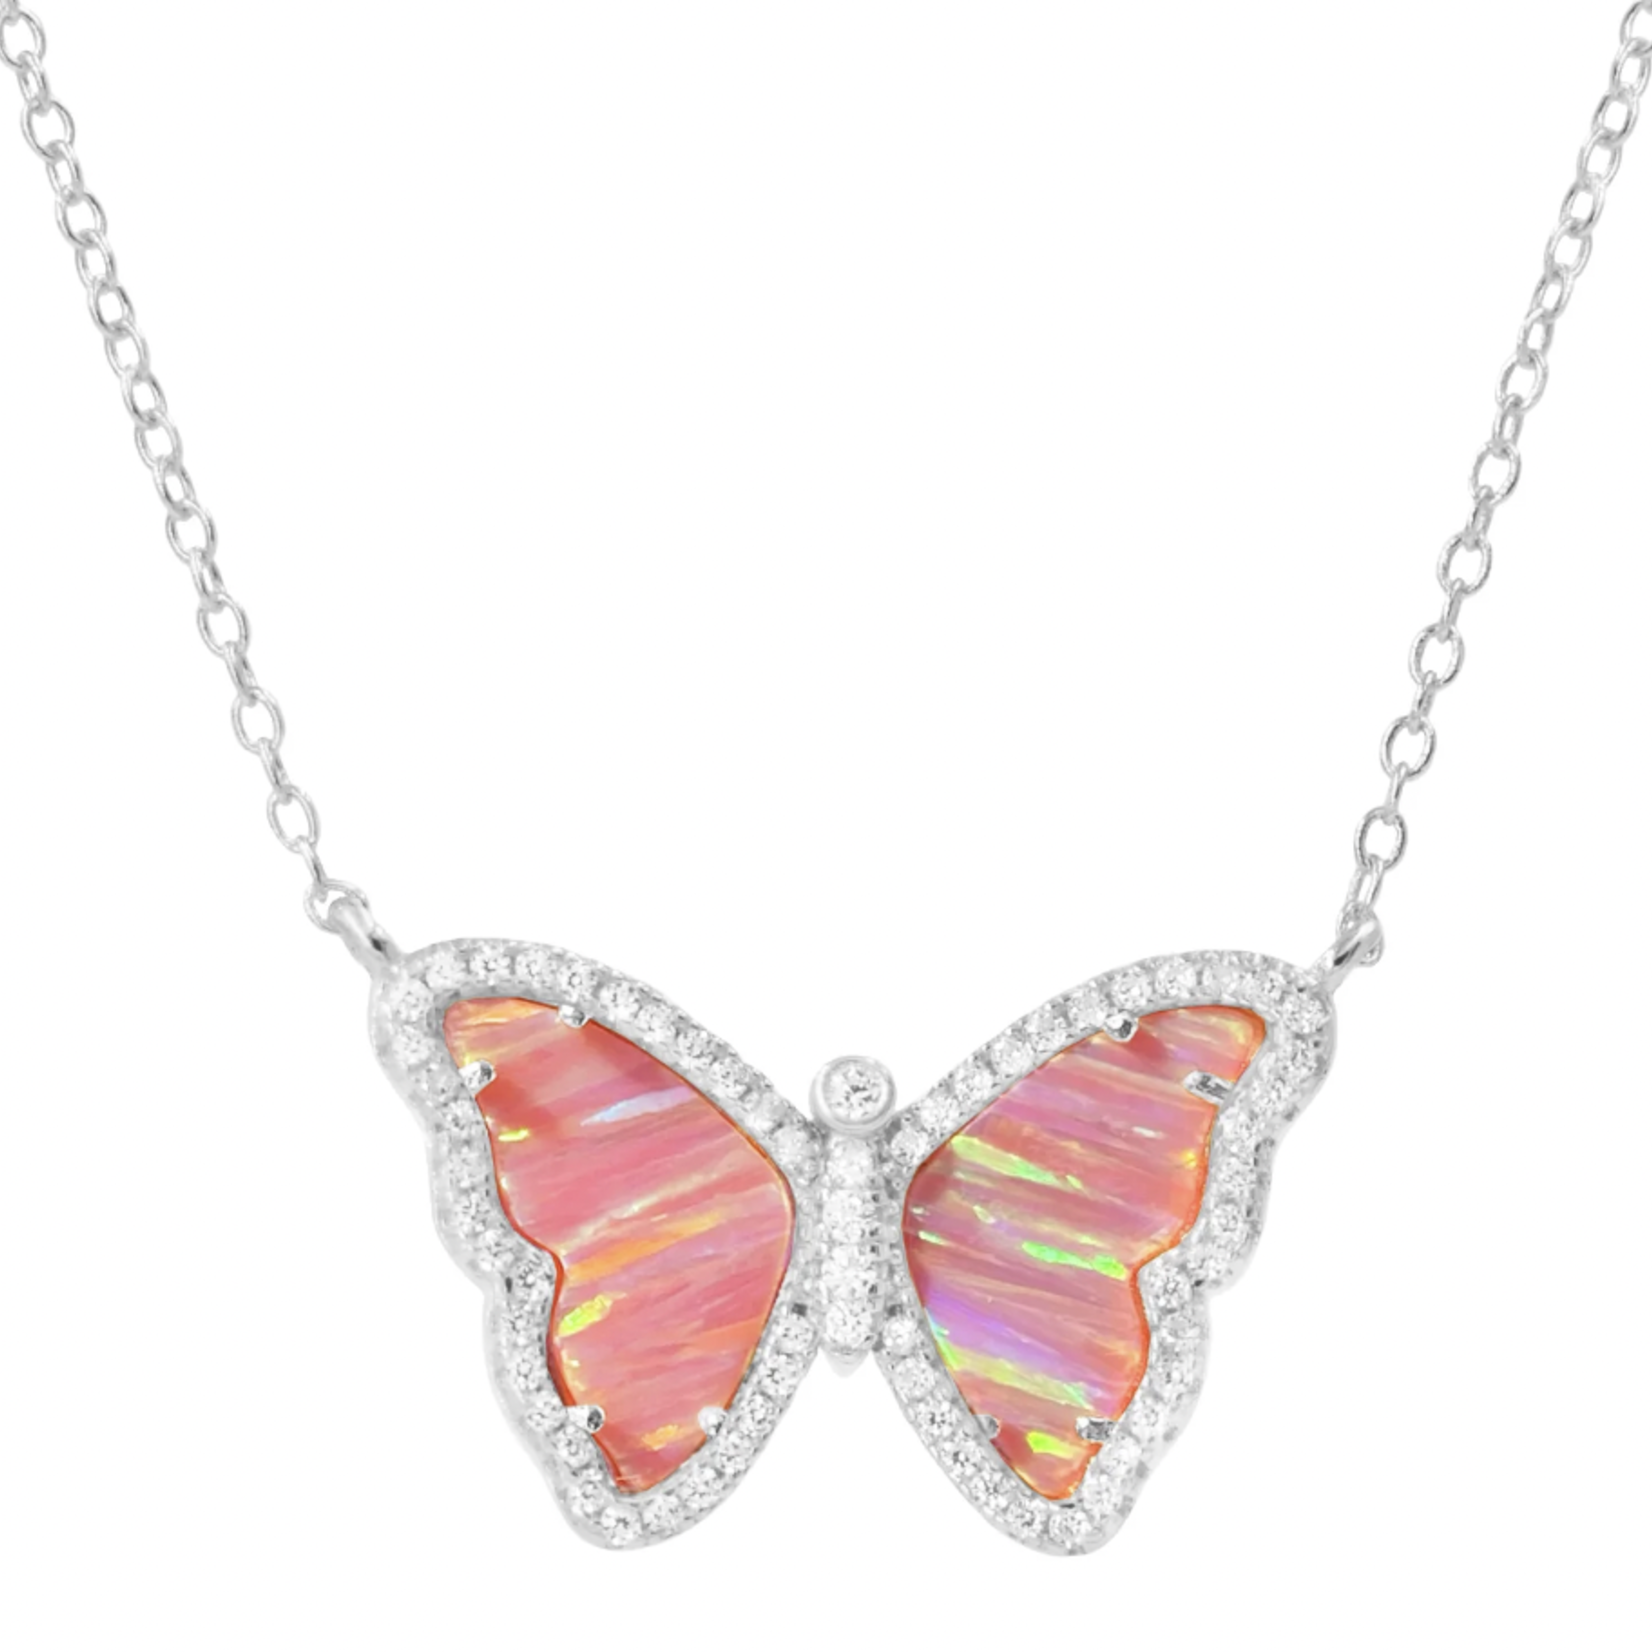 Opal Butterfly Necklace with Stripes - Coral Opal / Silver